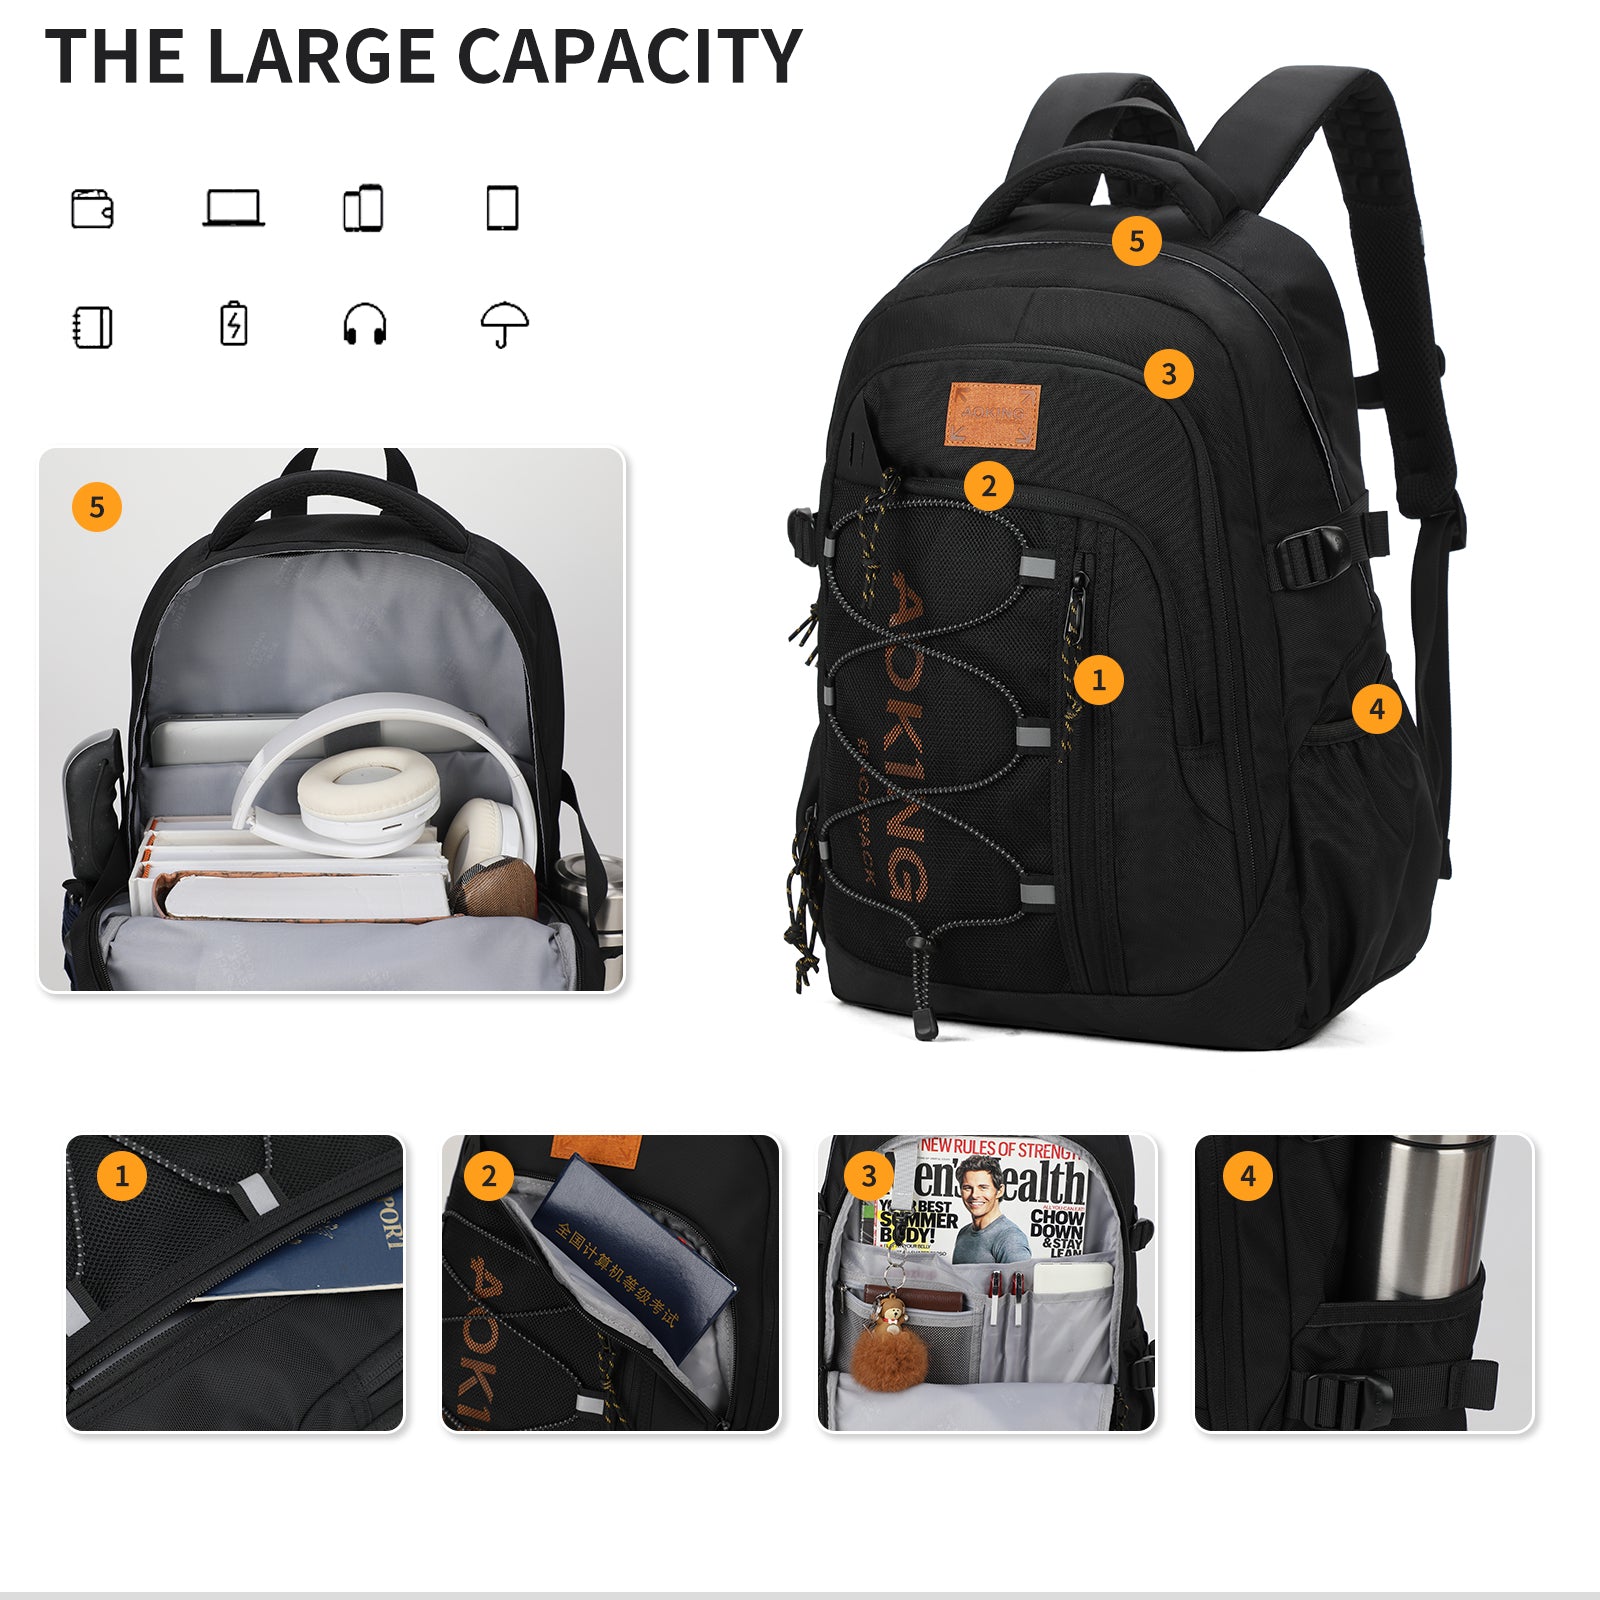 Aoking Backpack Large Capacity Casual Backpack Student Bag XN3360